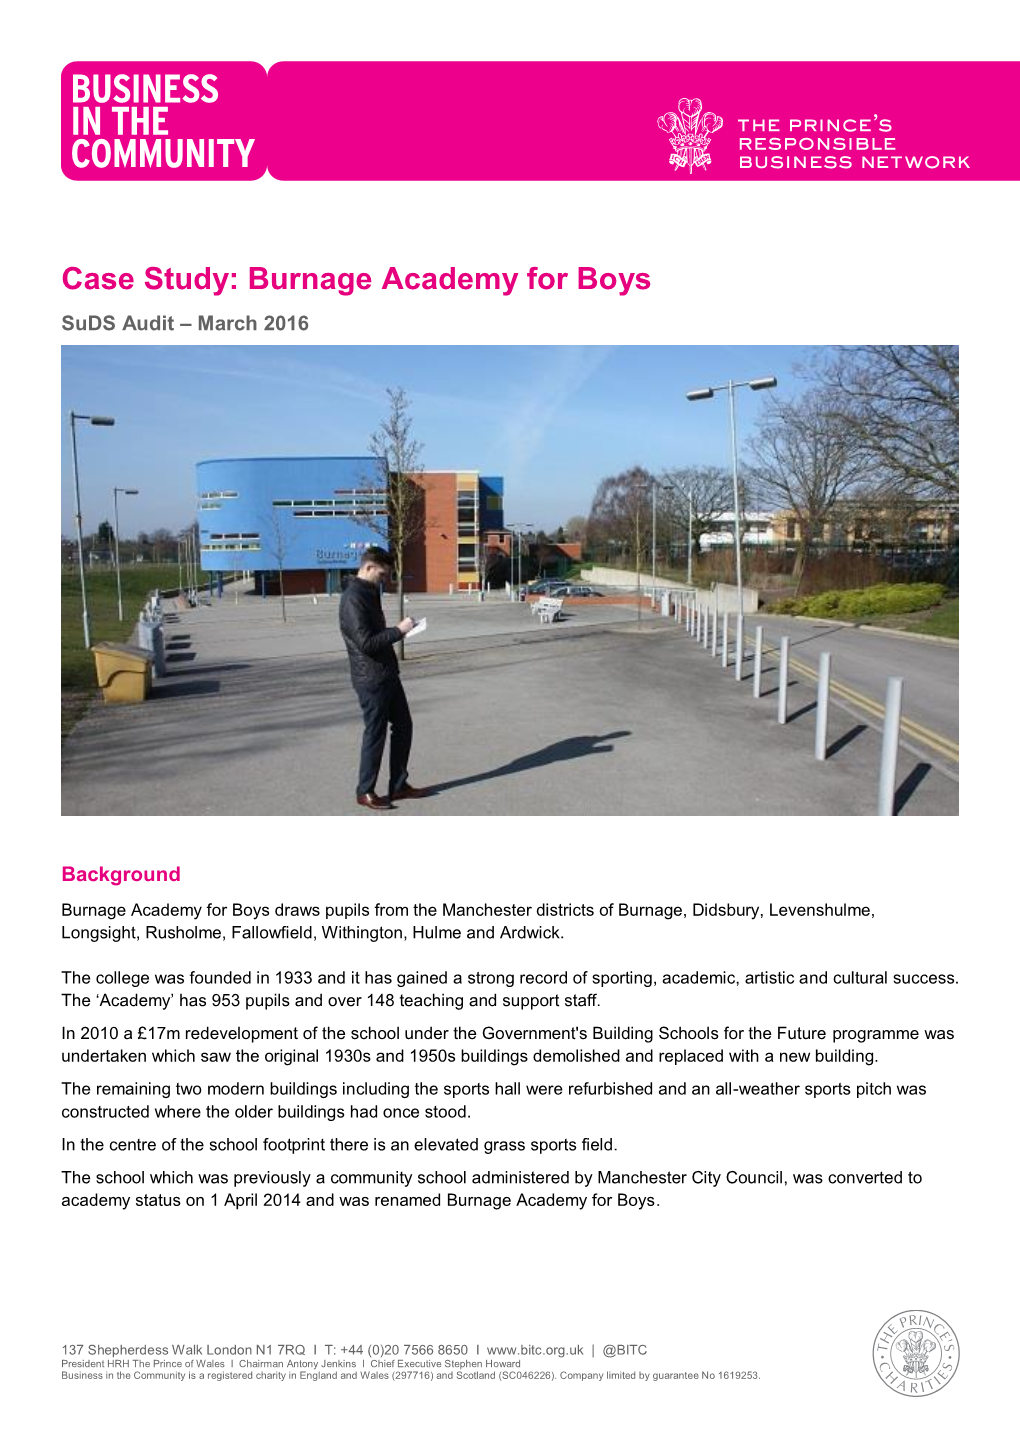 Burnage Academy for Boys Suds Audit – March 2016